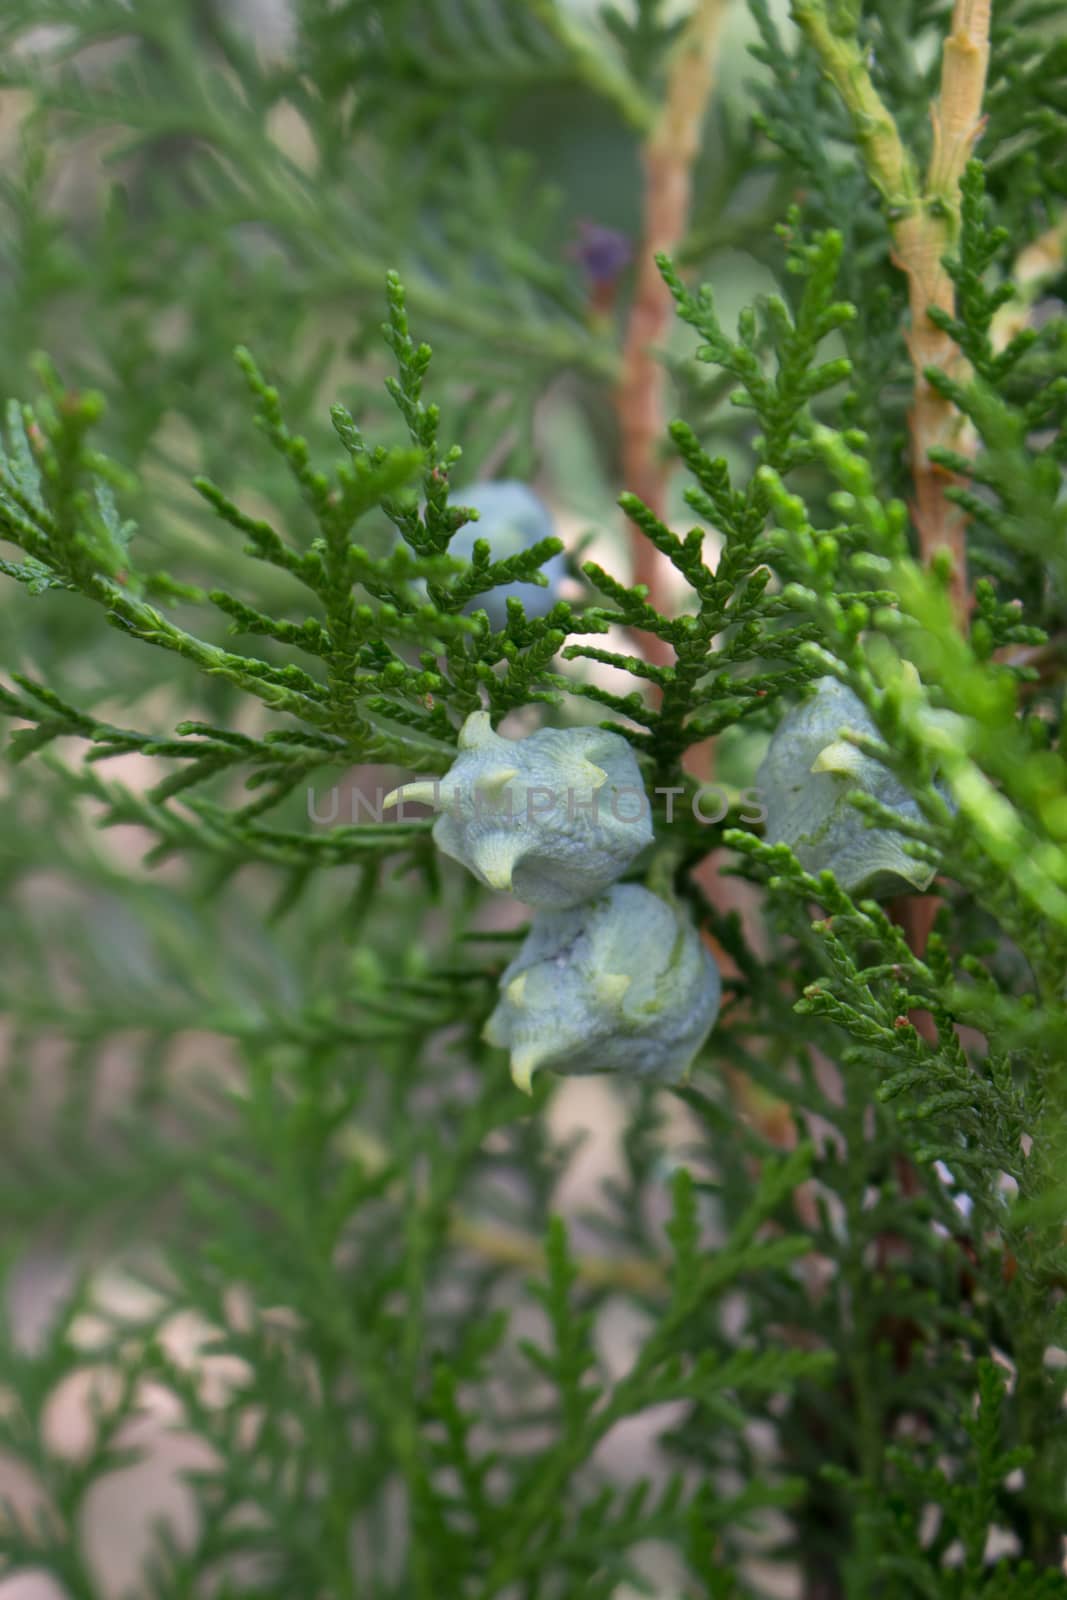 A thuja branch with buds